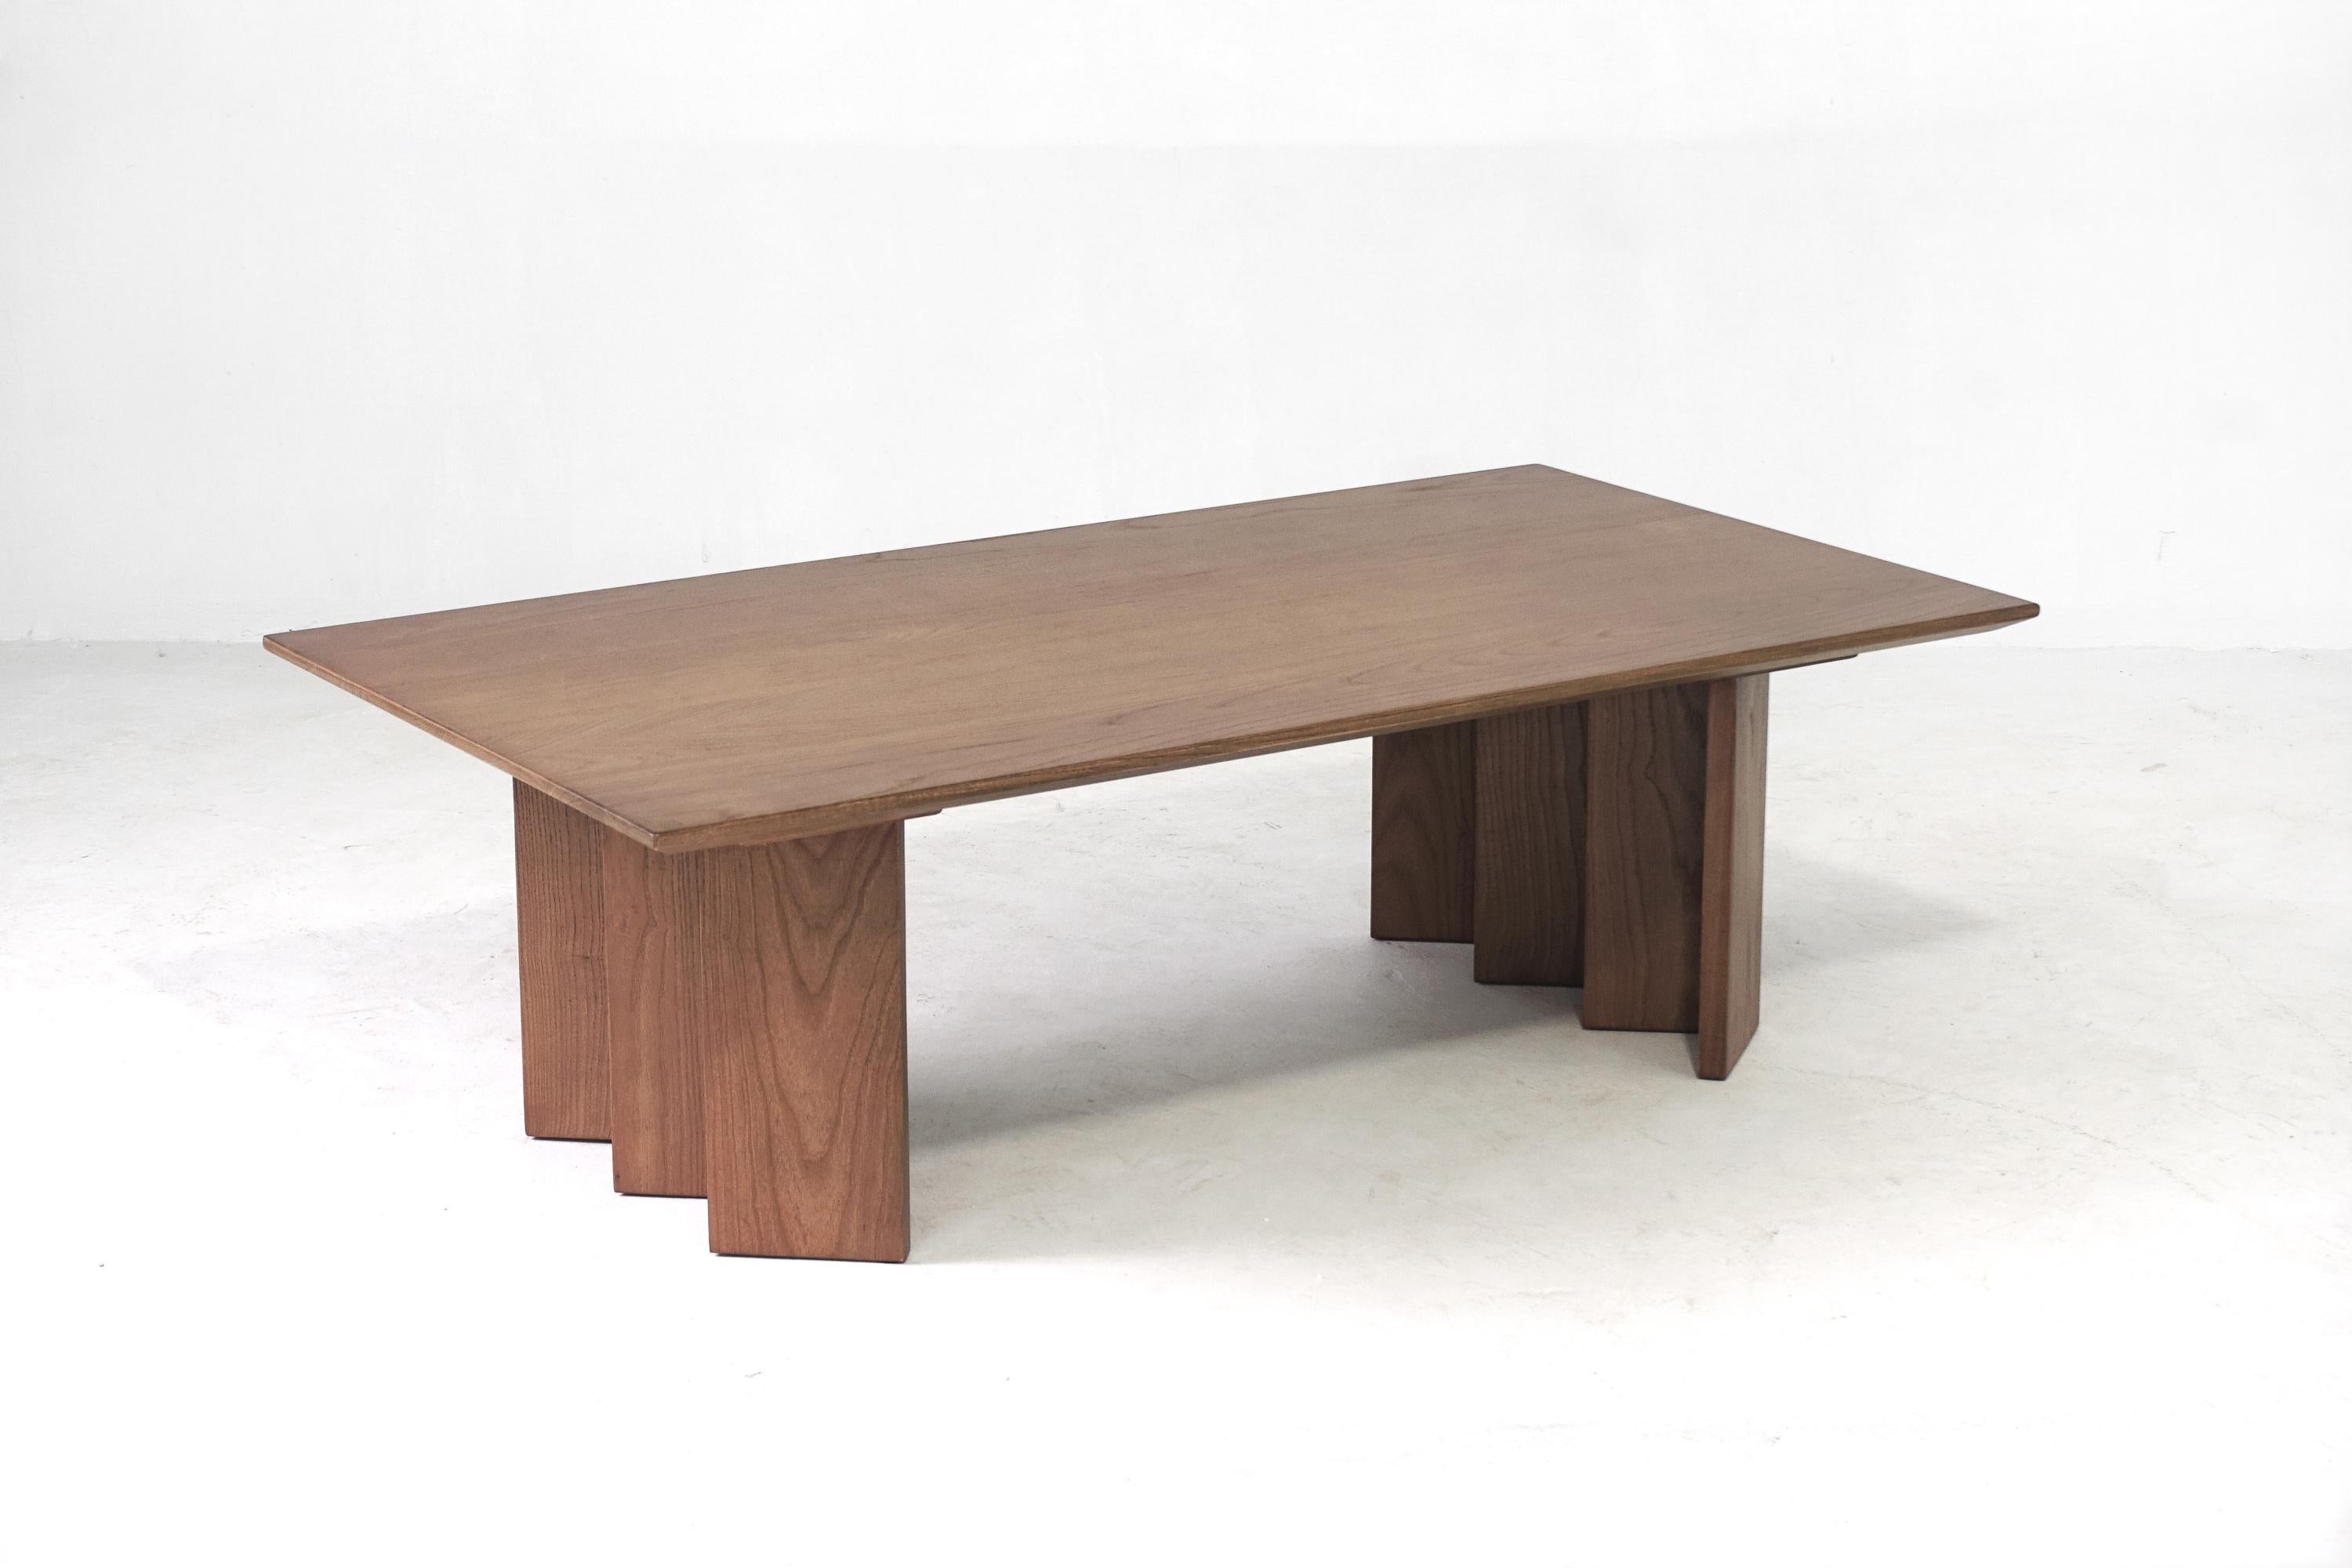 Chinese Zafal Coffee Table in Sienna, Minimalist Coffee Table For Sale